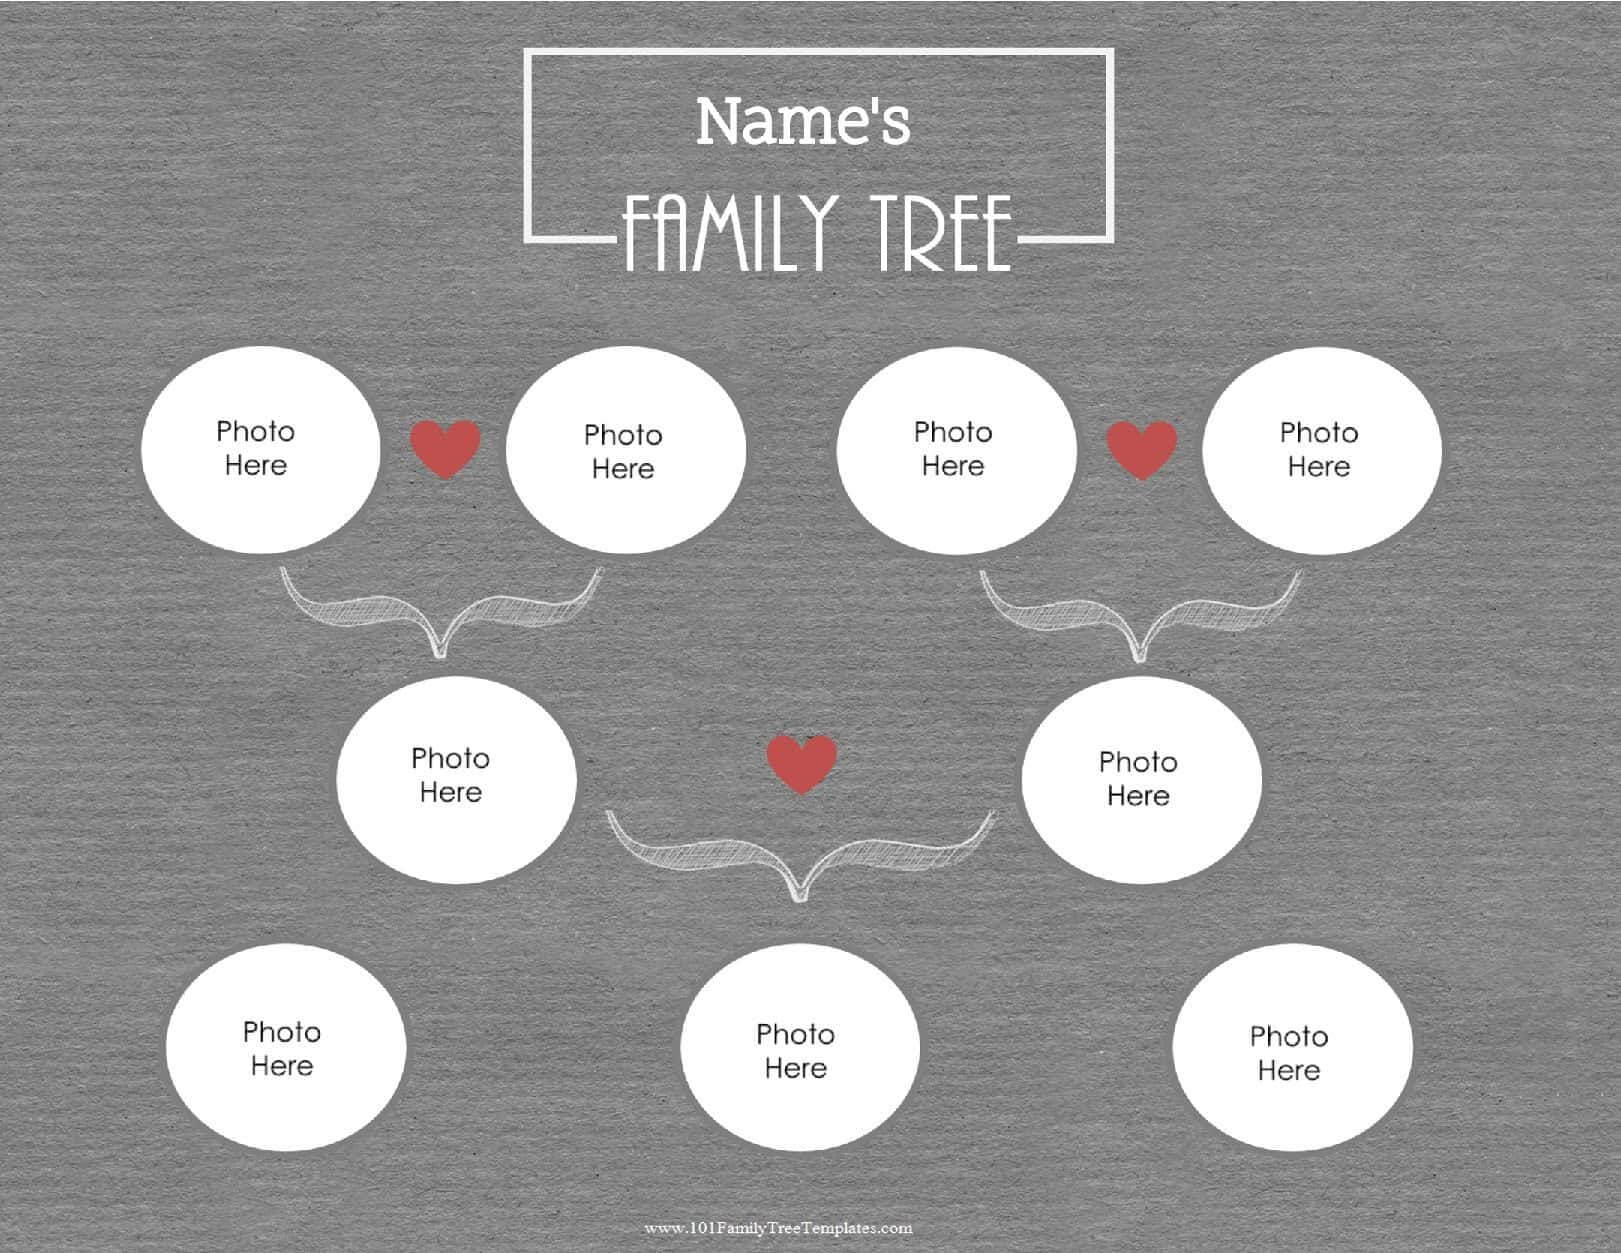 Free Editable Family Tree Maker Templates | Customize Online Within Blank Family Tree Template 3 Generations